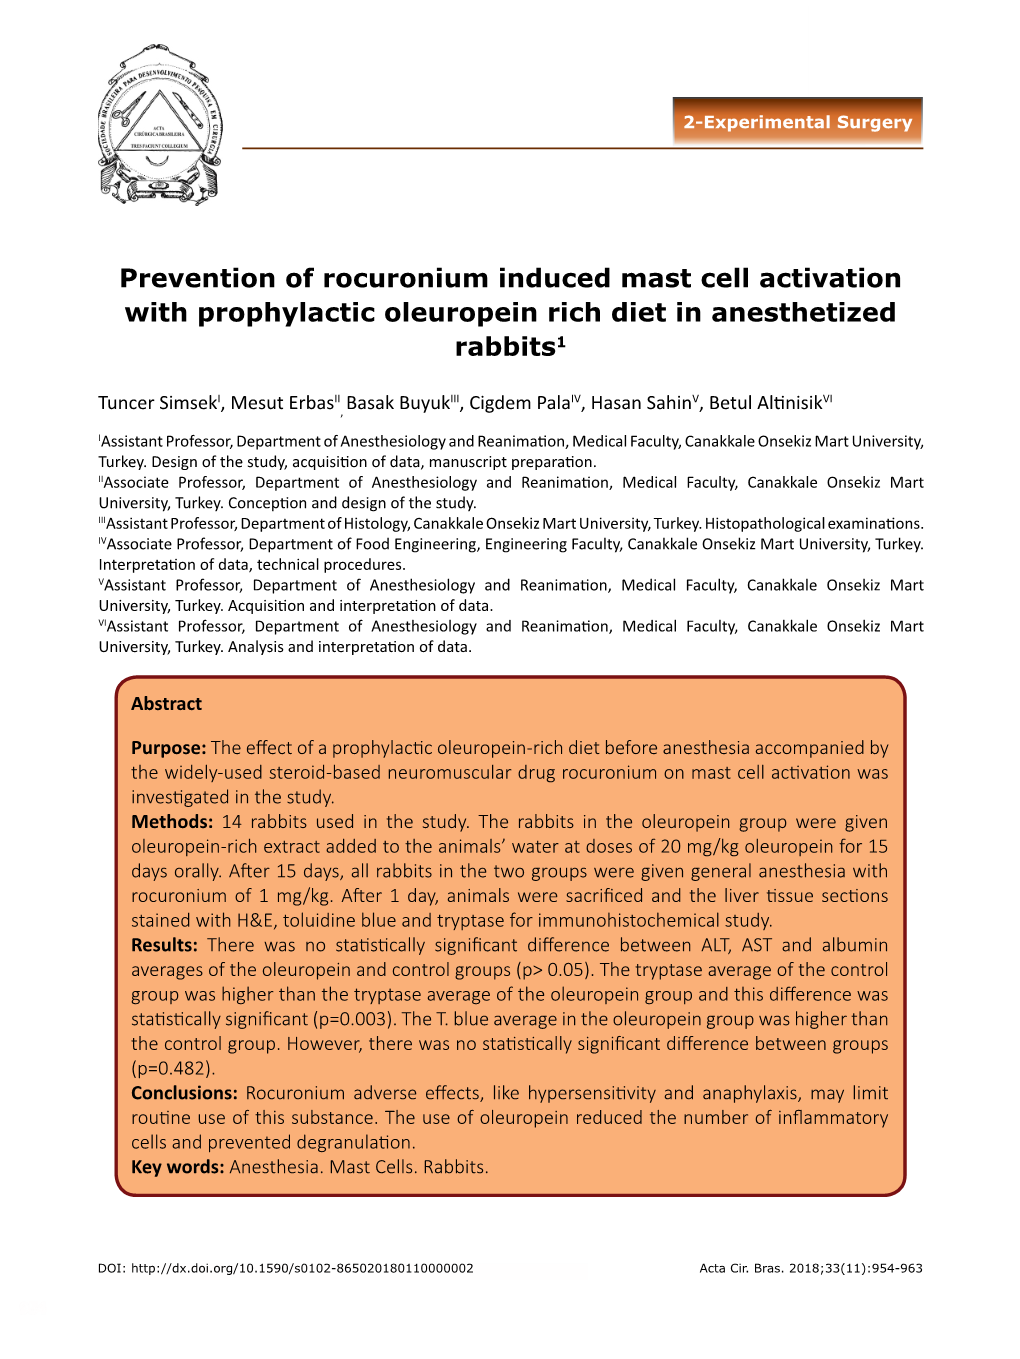 Prevention of Rocuronium Induced Mast Cell Activation with Prophylactic Oleuropein Rich Diet in Anesthetized Rabbits1